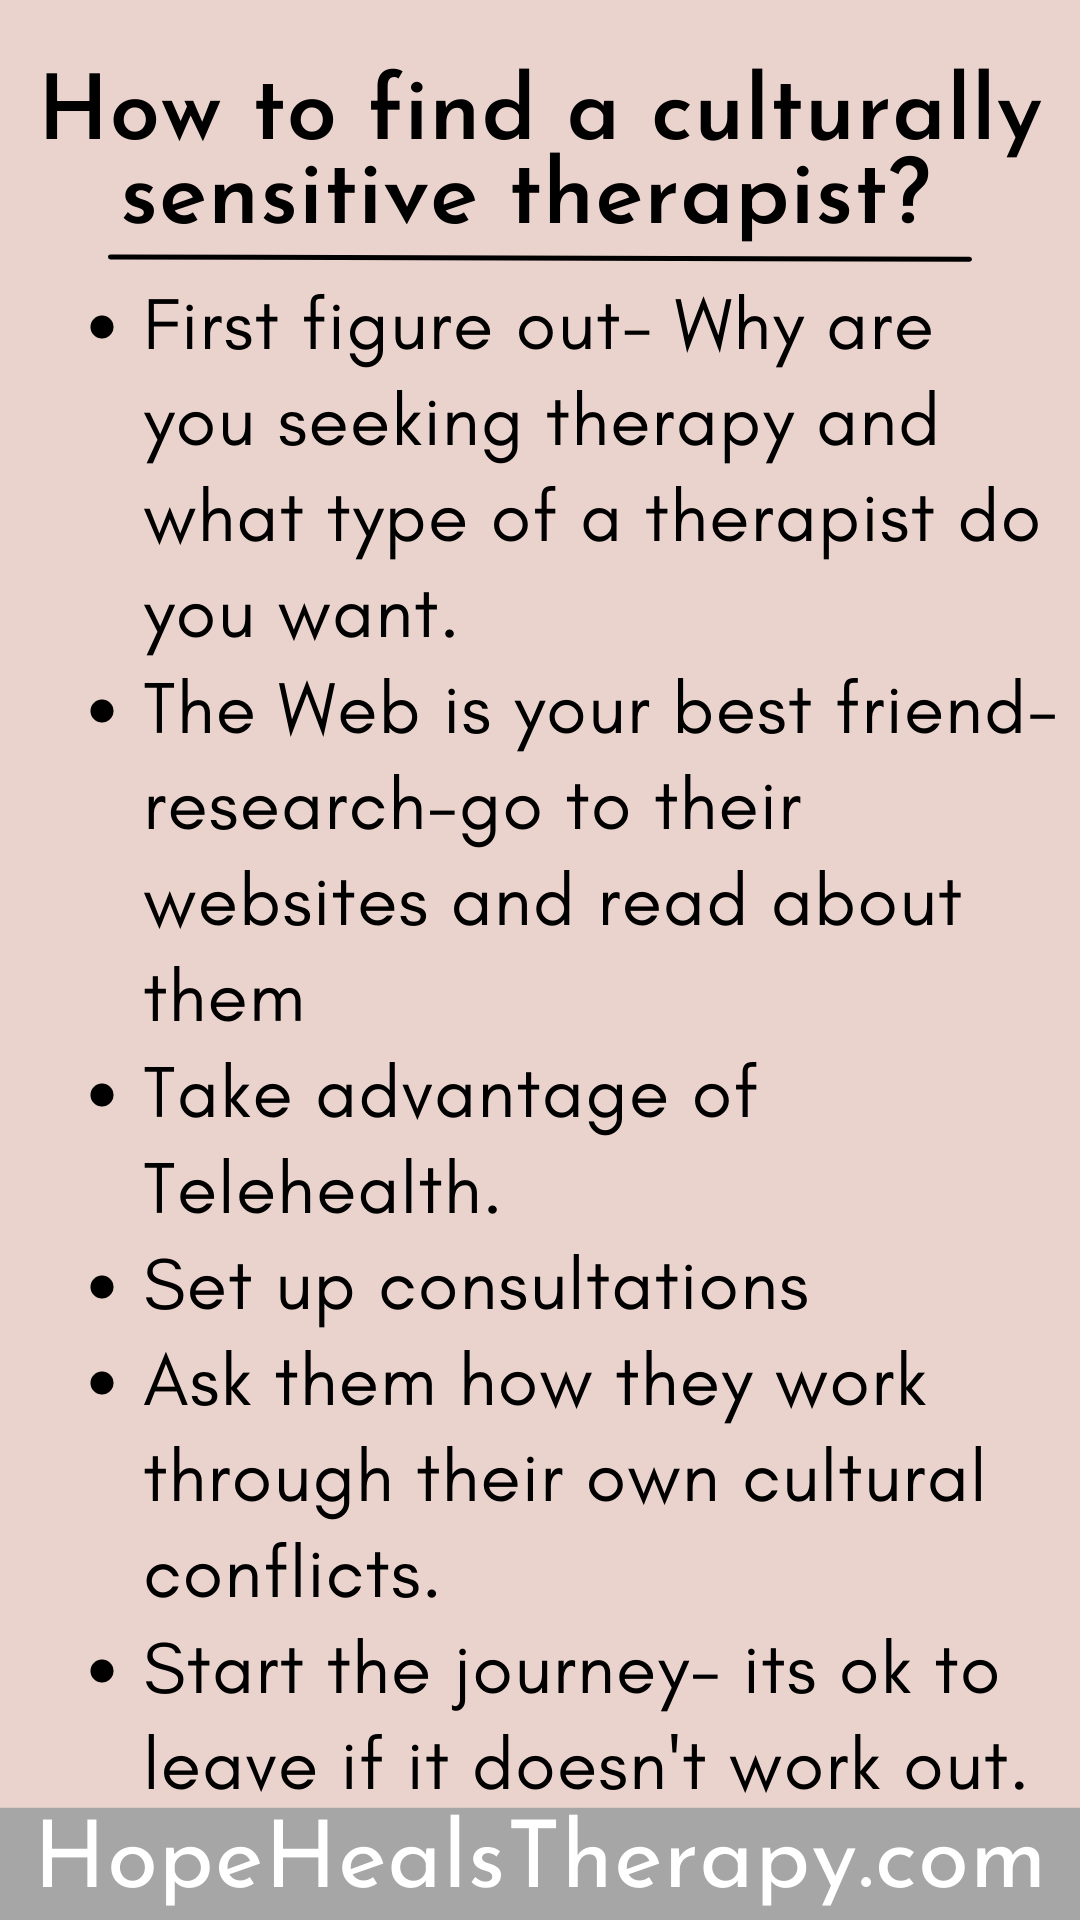 How-to-find-a-culturally-sensitive-therapist